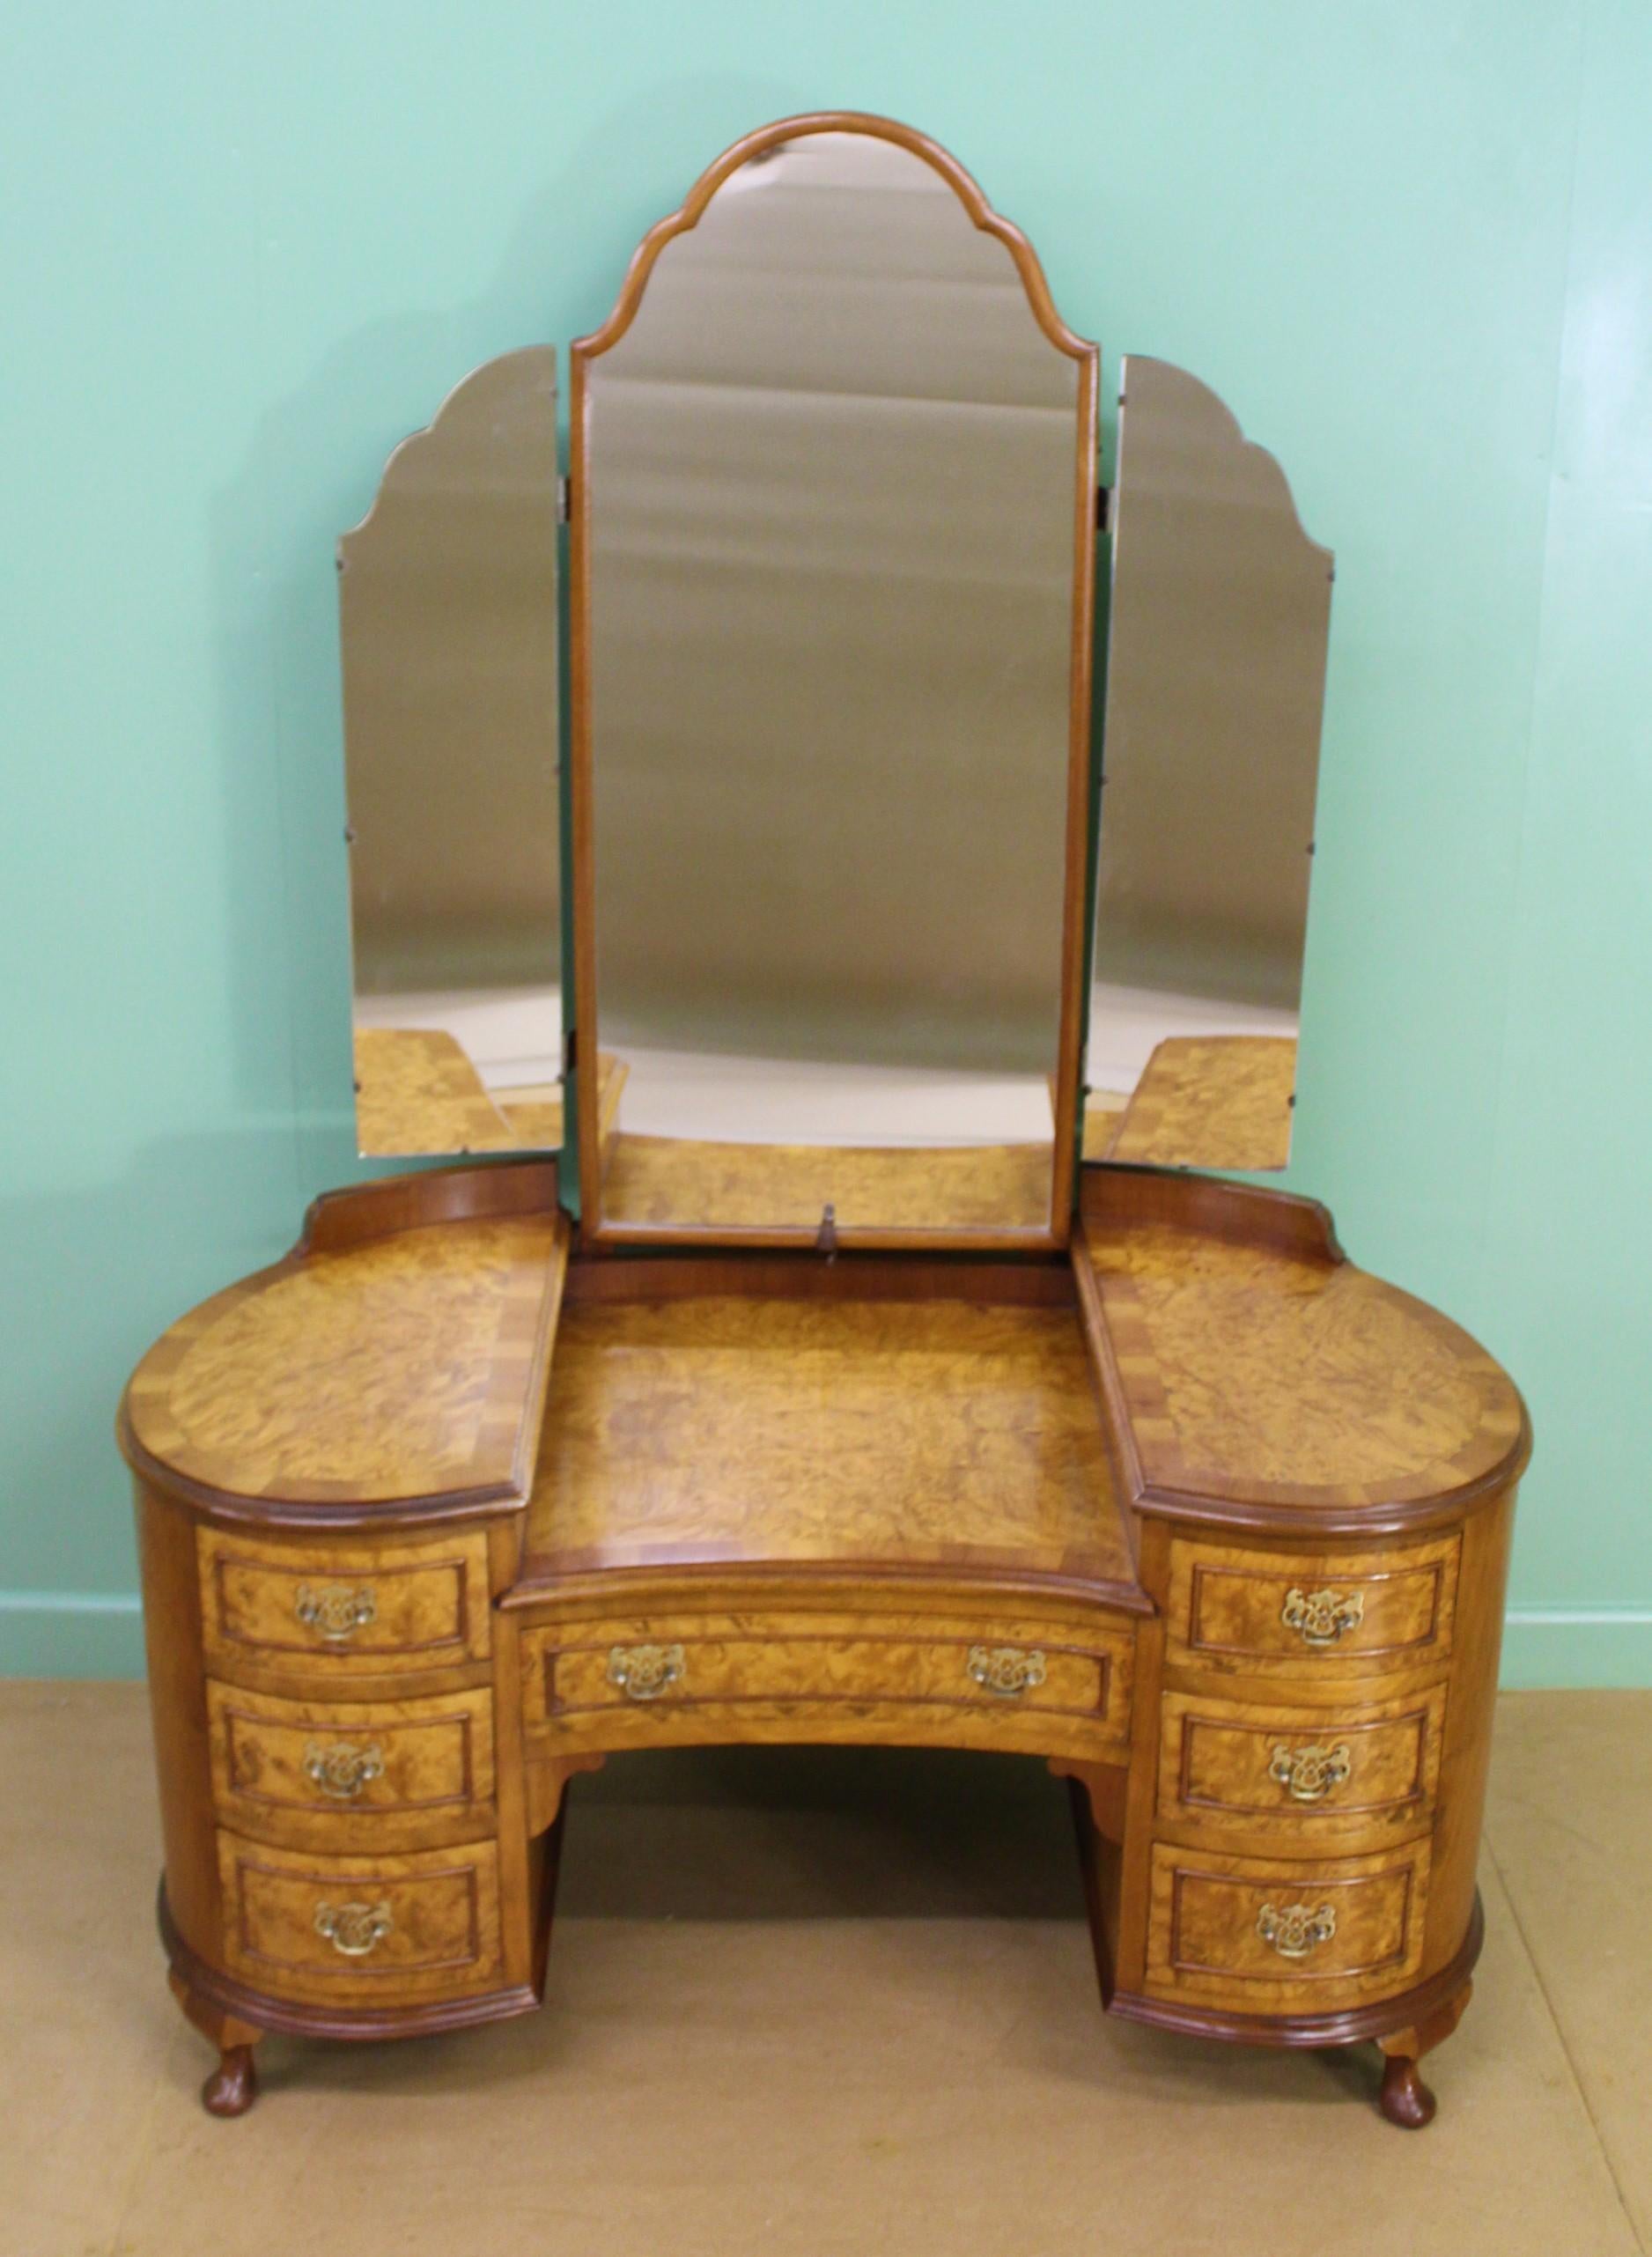 A charming burr walnut kidney shaped dressing table in the Queen Anne style. Well made in solid walnut with attractive burr walnut veneers. The triple mirrors are adjustable and in excellent order. The table is of kidney form and has an arrangement